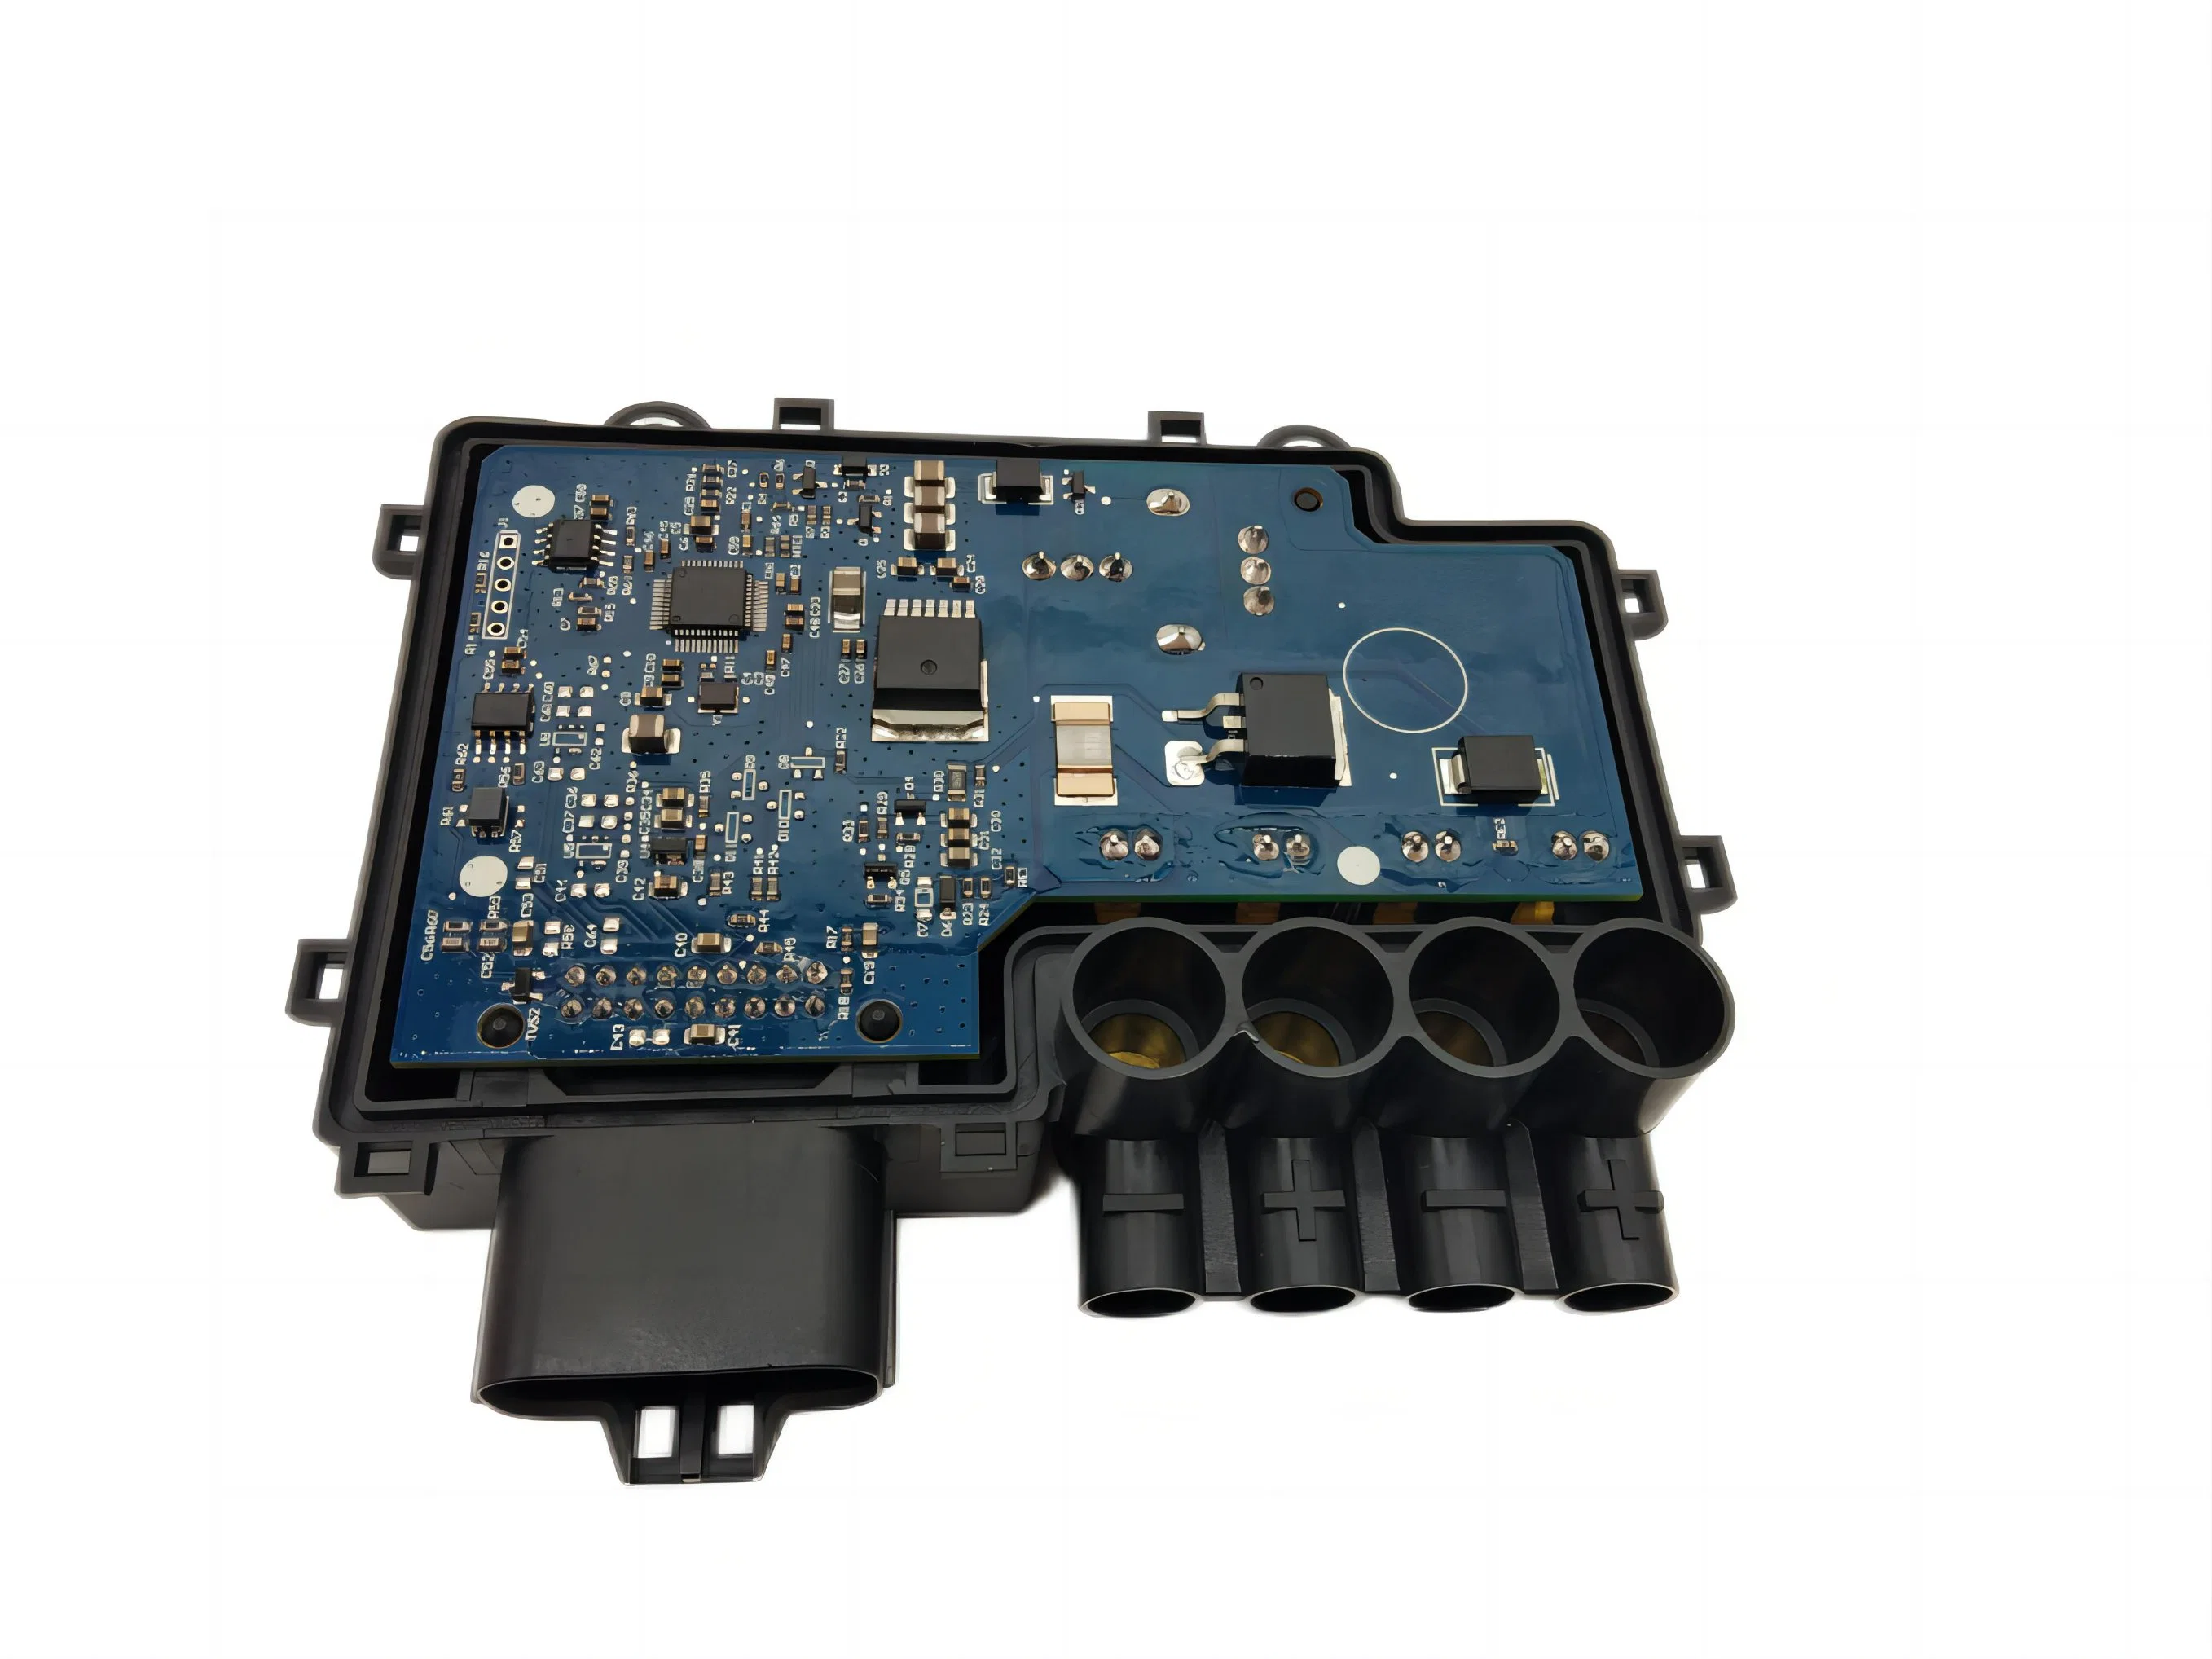 IATF16949 Certified PCB Main Board PCBA Assembly for Automobile Display / Truck Brake Control